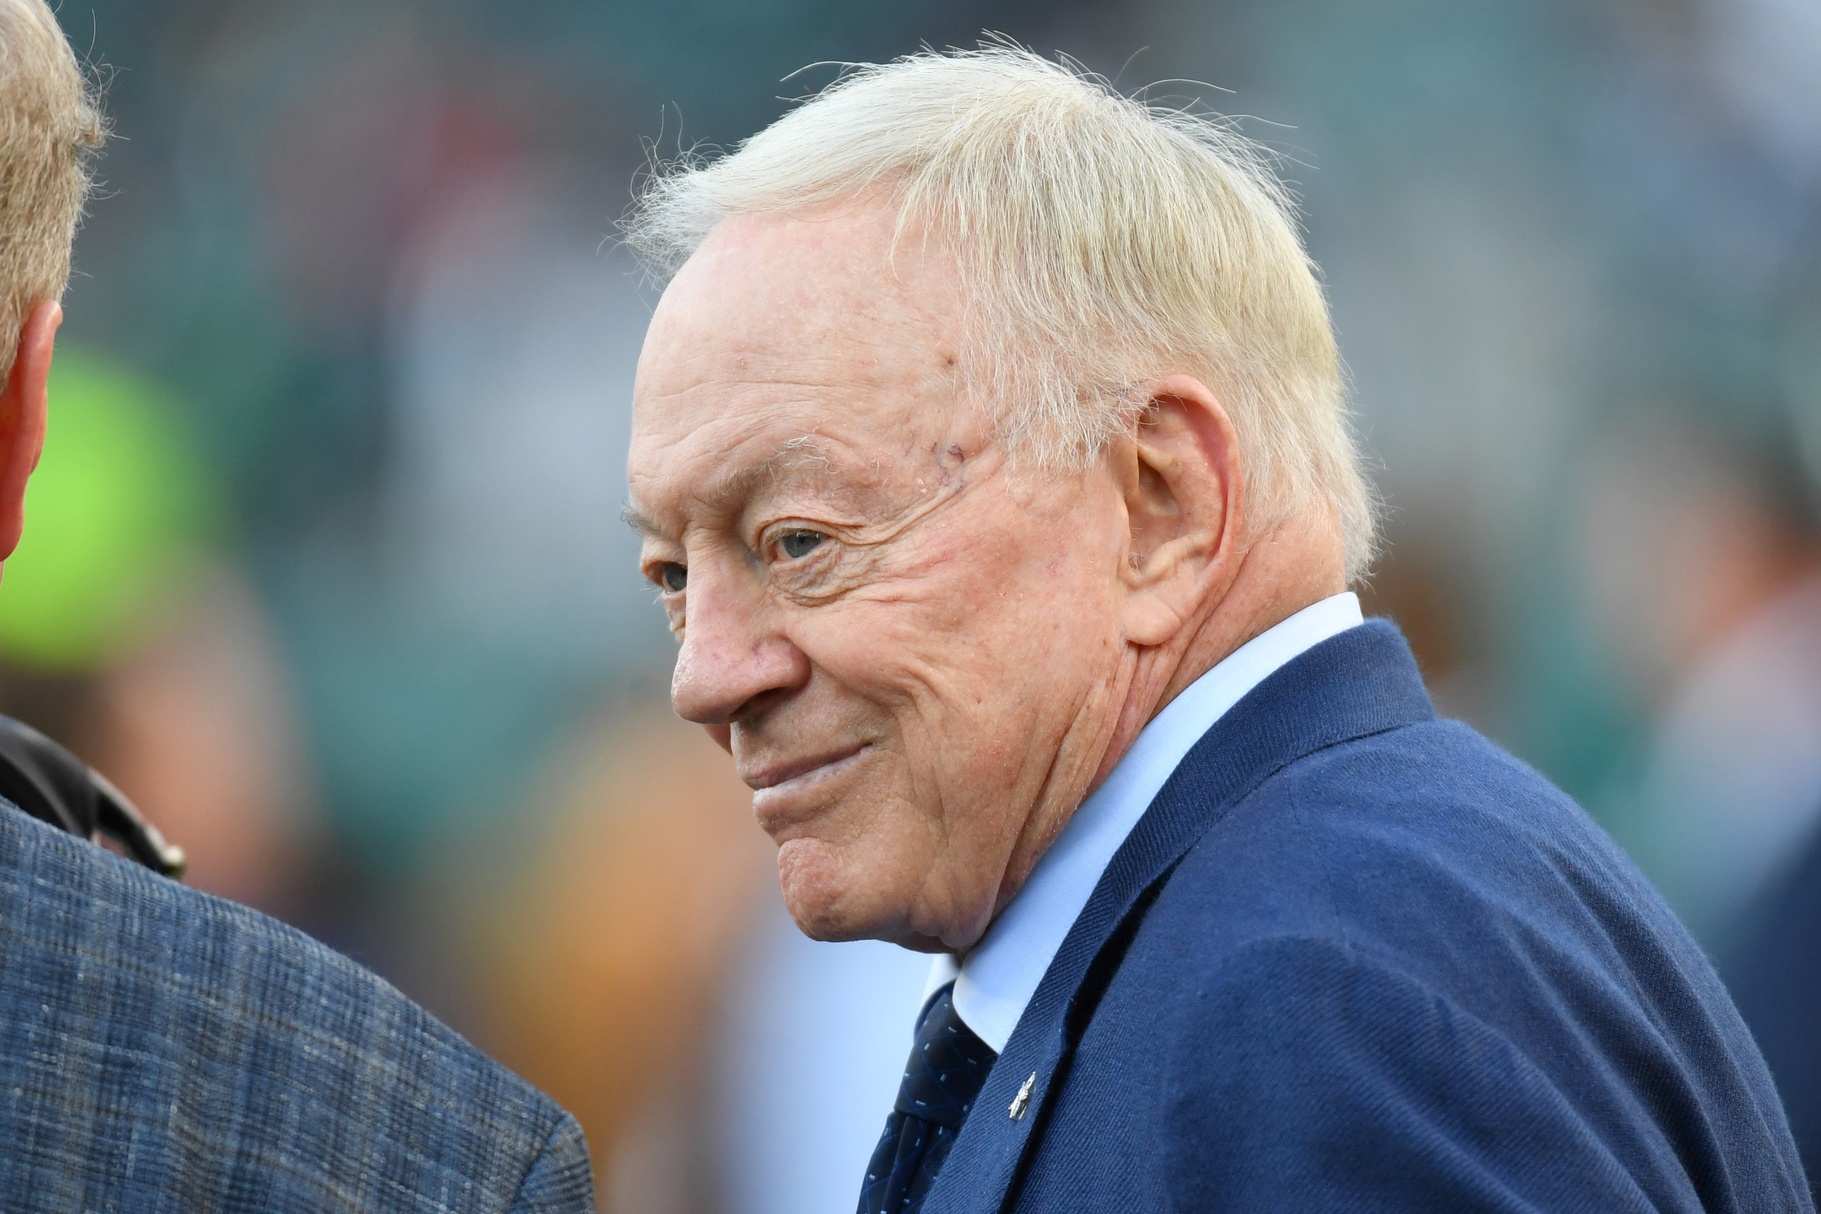 Dallas Cowboys owner Jerry Jones on the field against the Philadelphia Eagles at Lincoln Financial Field.